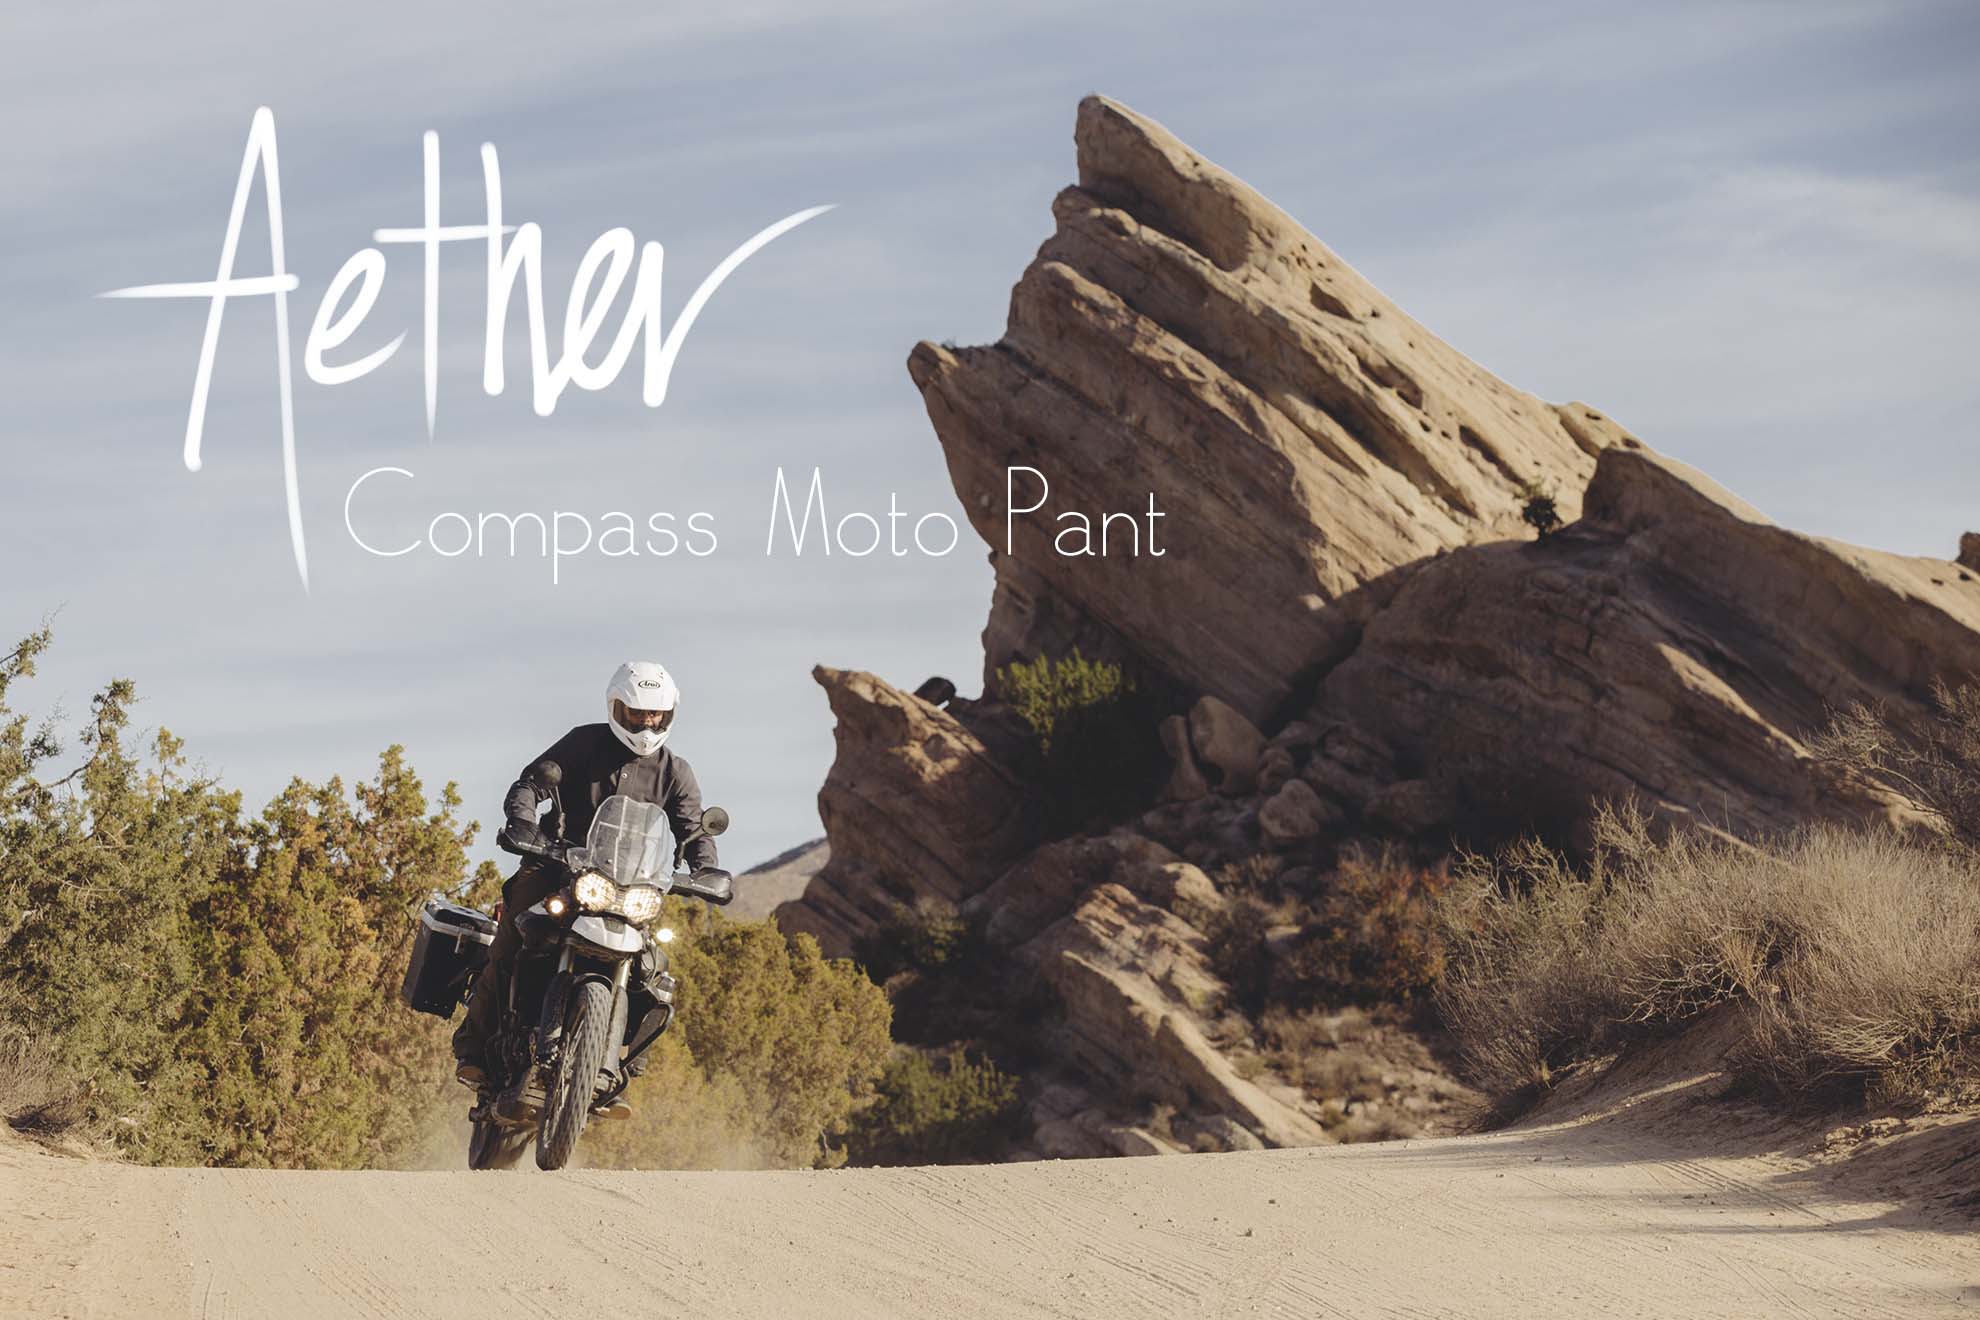 Aether Compass Moto Pant – The Mighty Motor